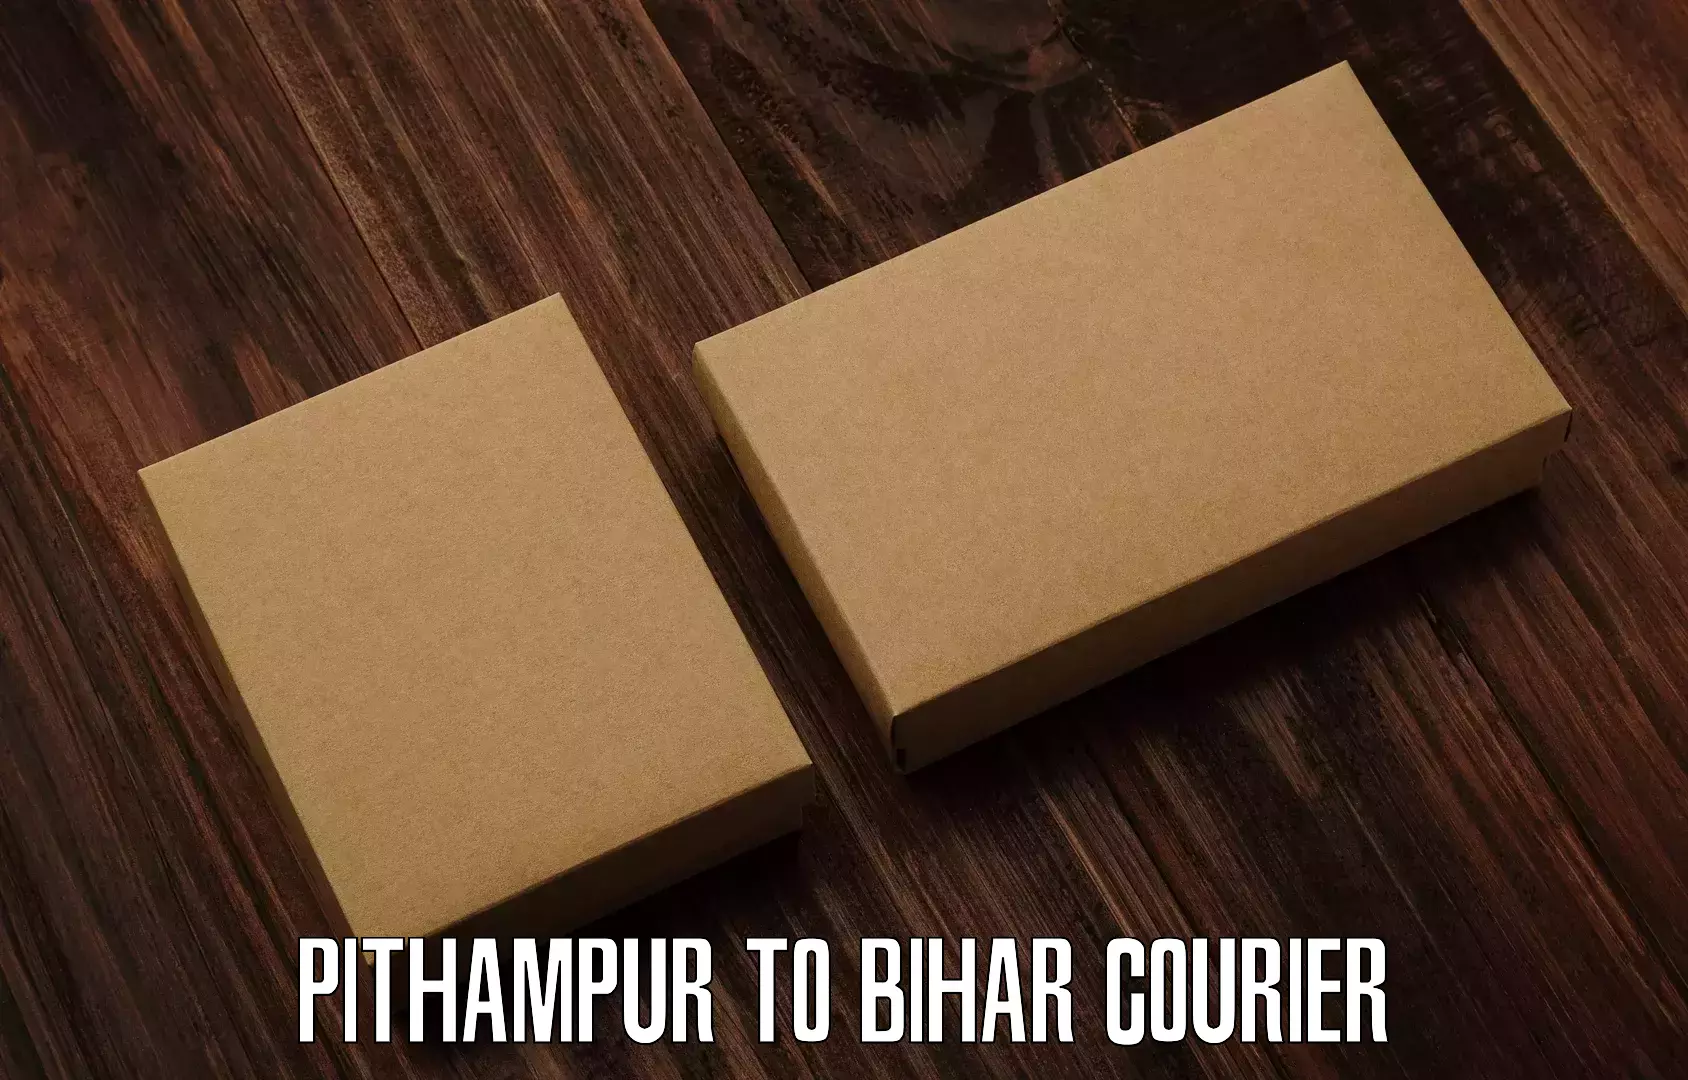 Automated shipping processes Pithampur to Bankipore